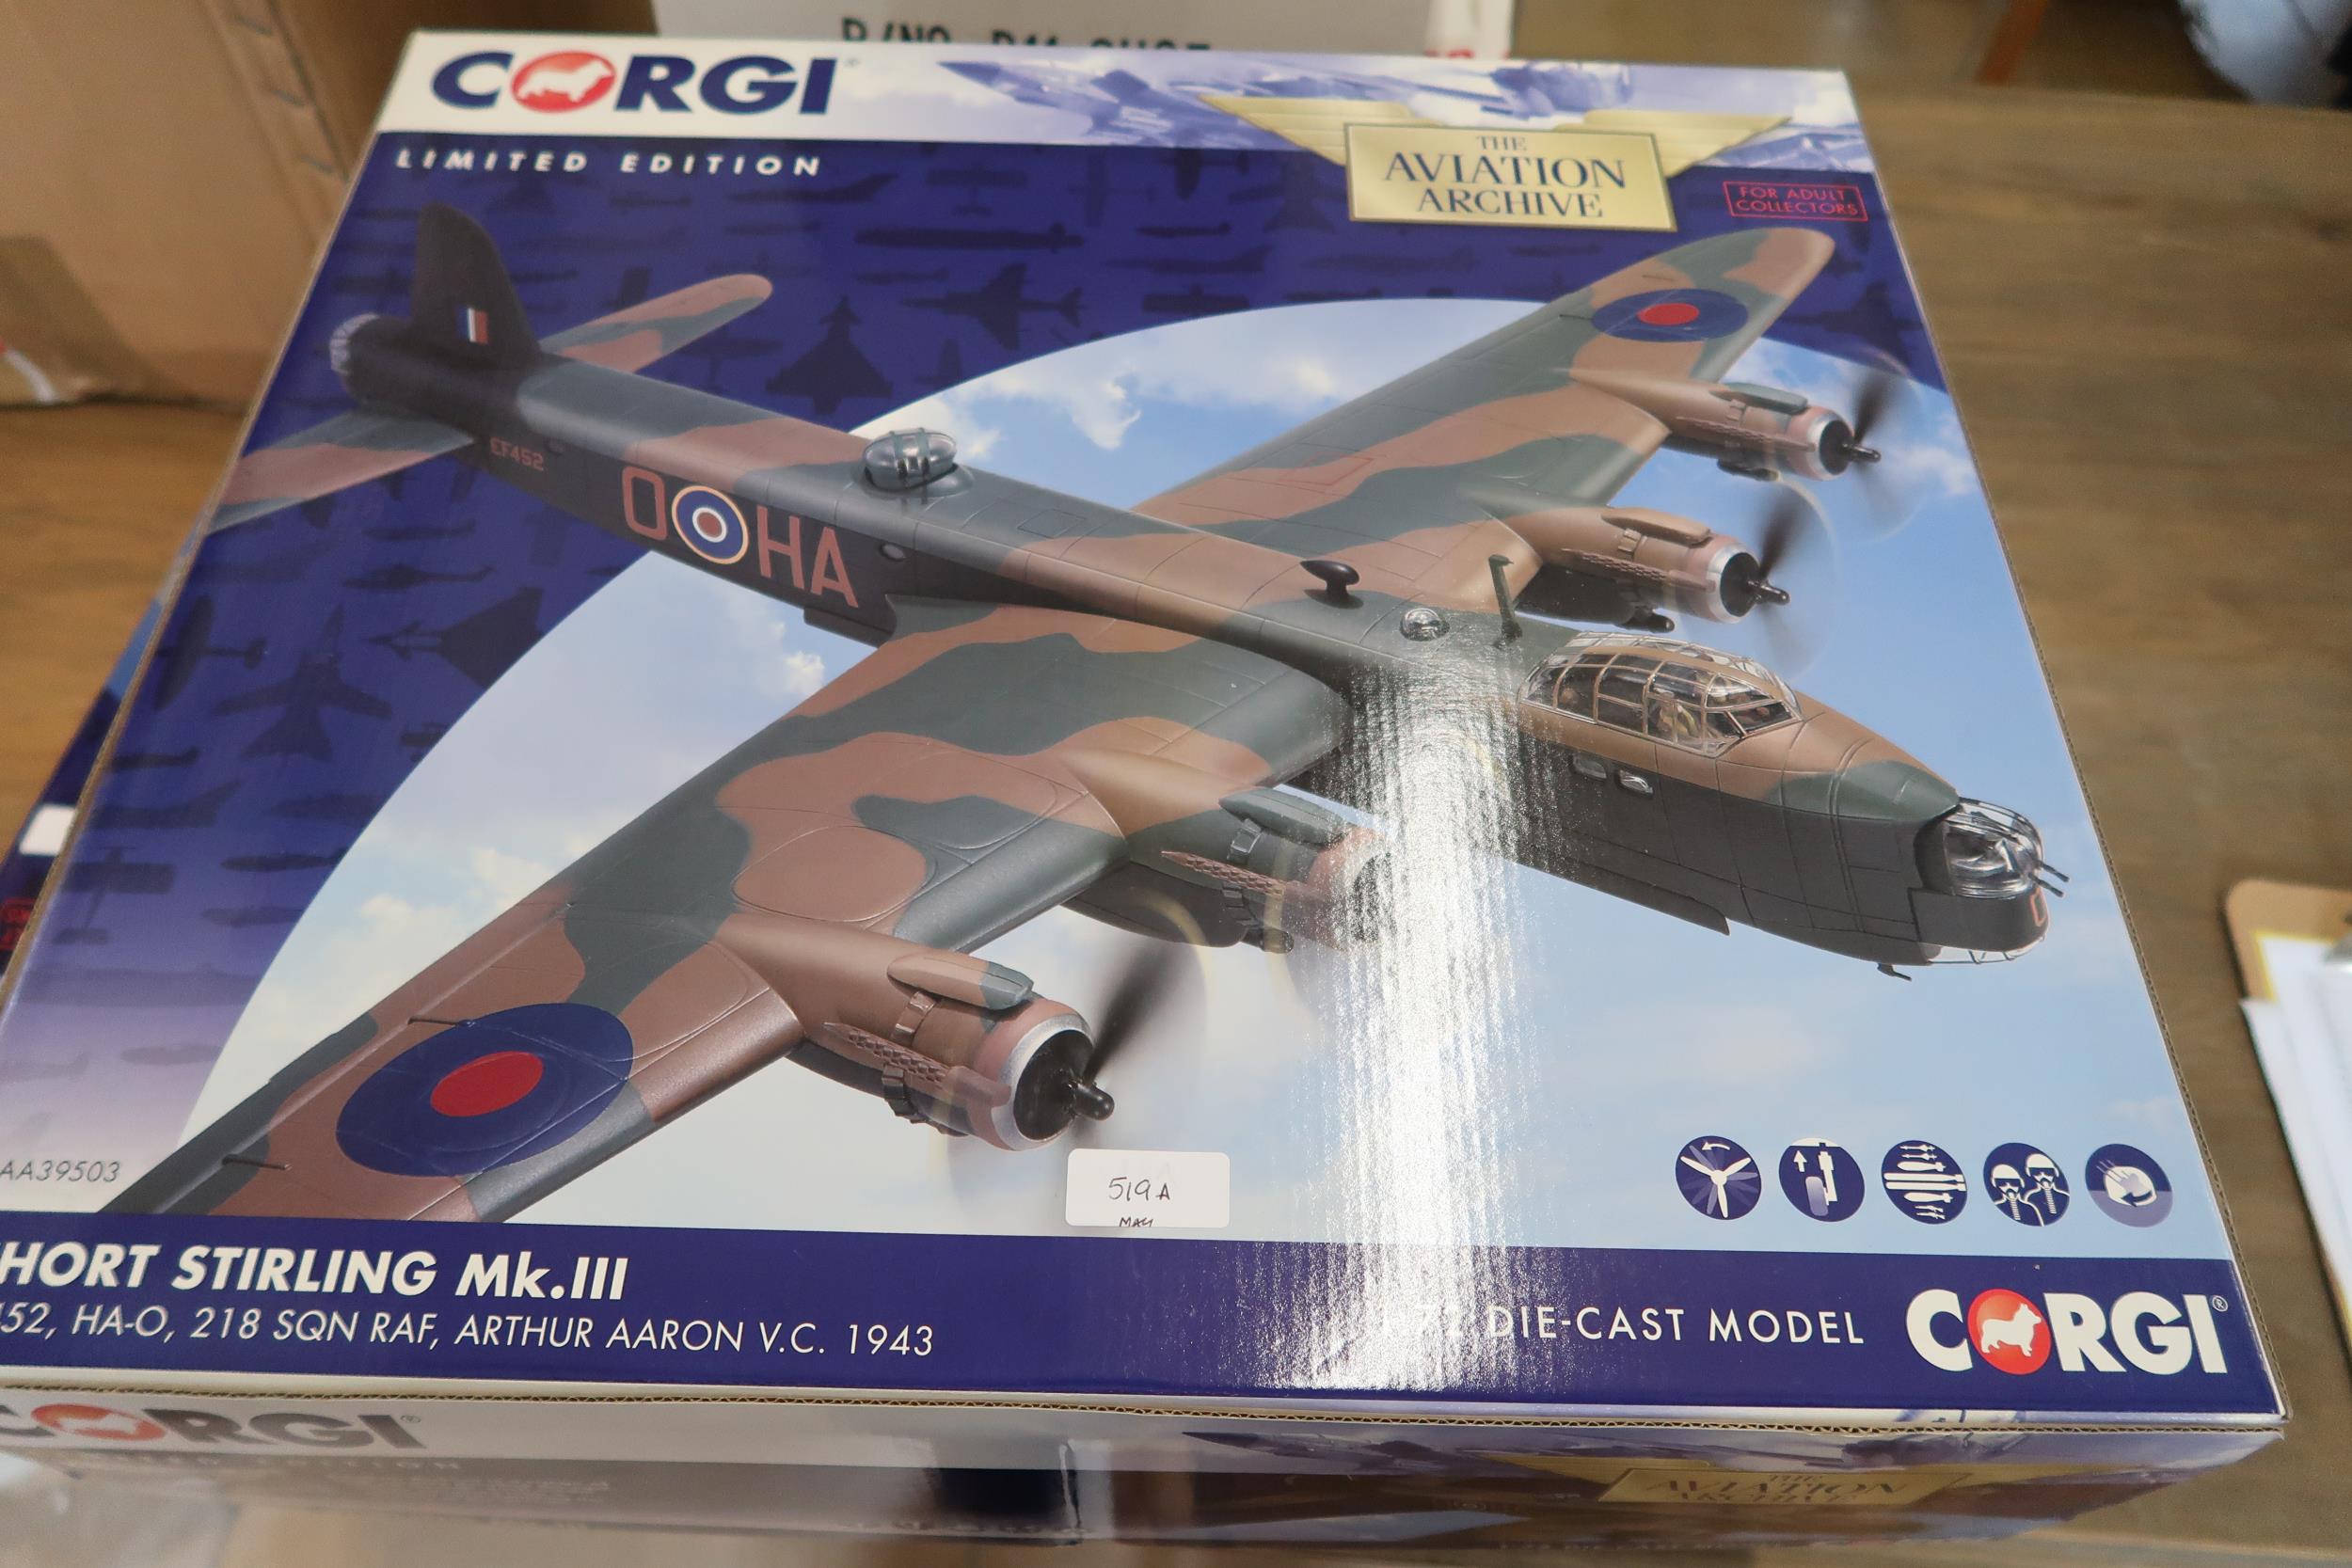 Corgi Collectors Limited edition Short Sterling Mark III 1:72 die cast model, Boxed.